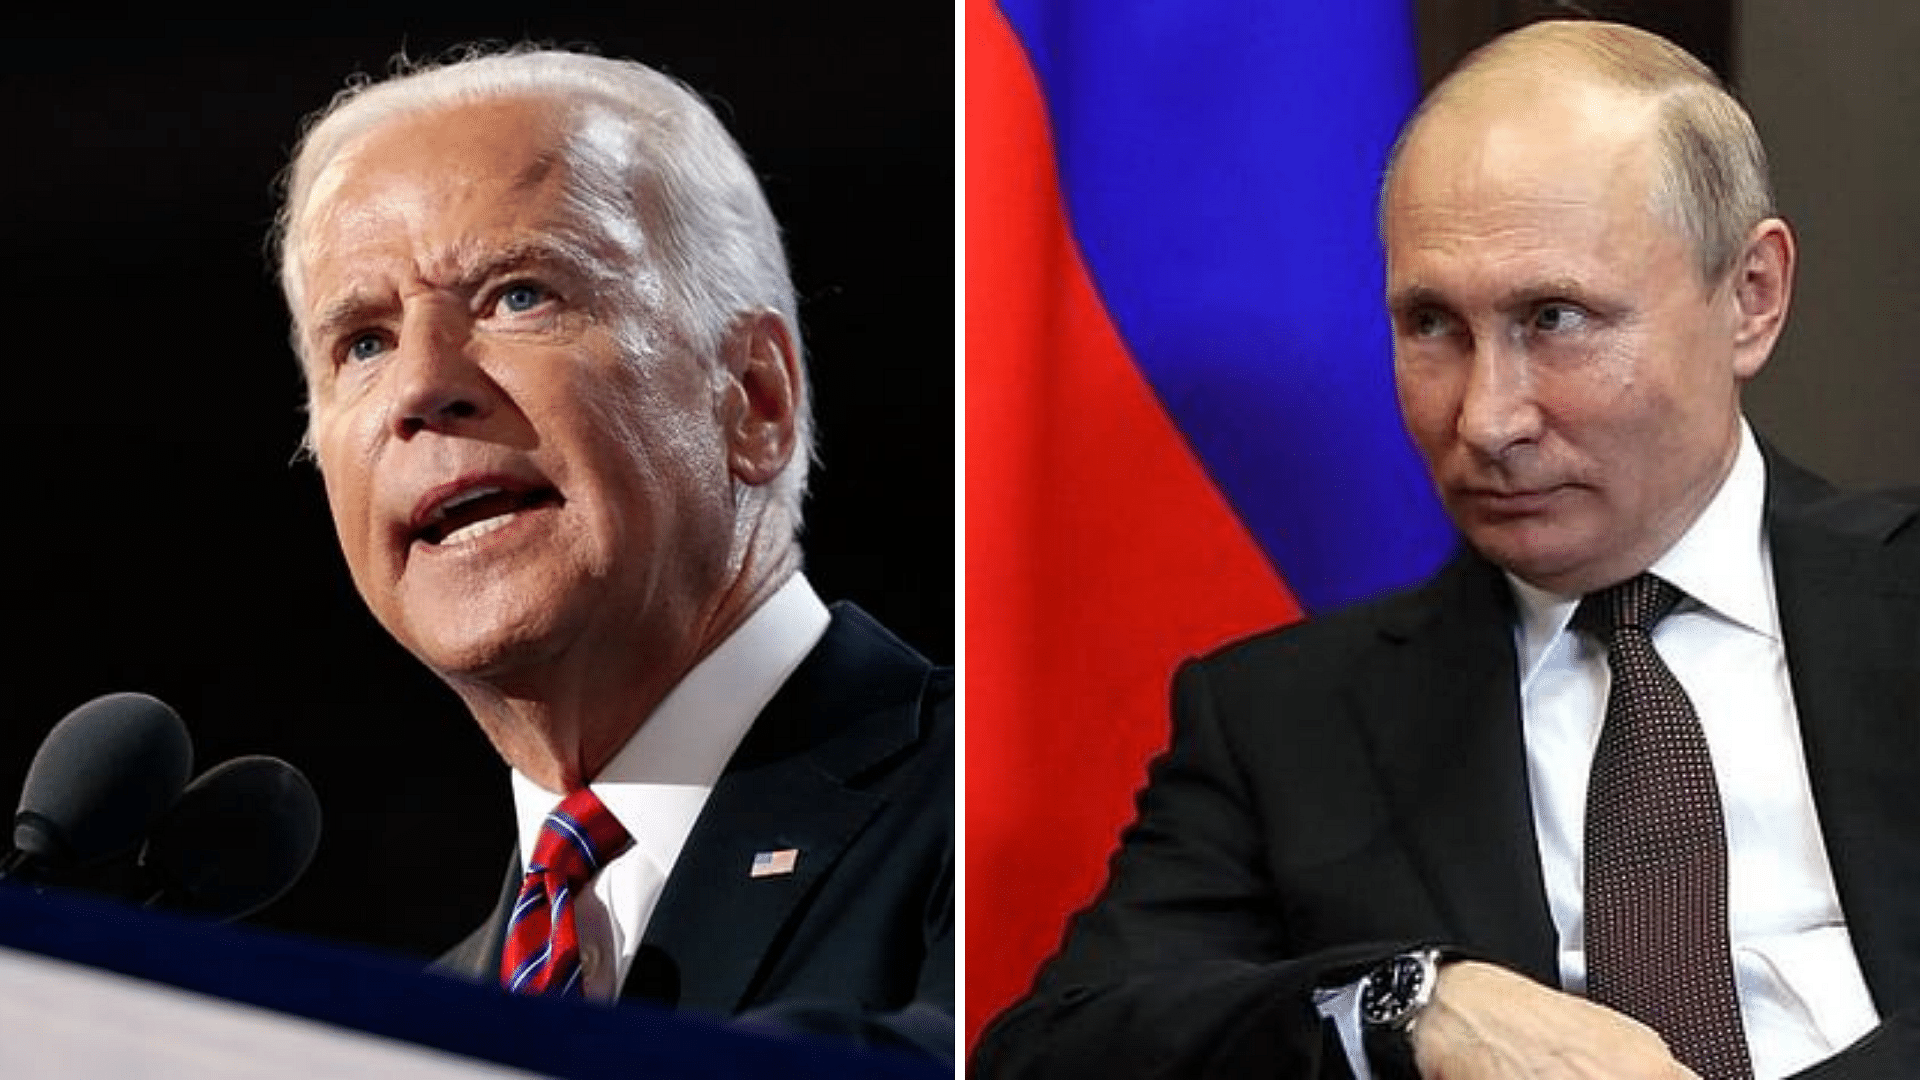 No one is expecting any major breakthroughs from US president Joe Biden’s first meeting since his election with Russian president Vladimir Putin.